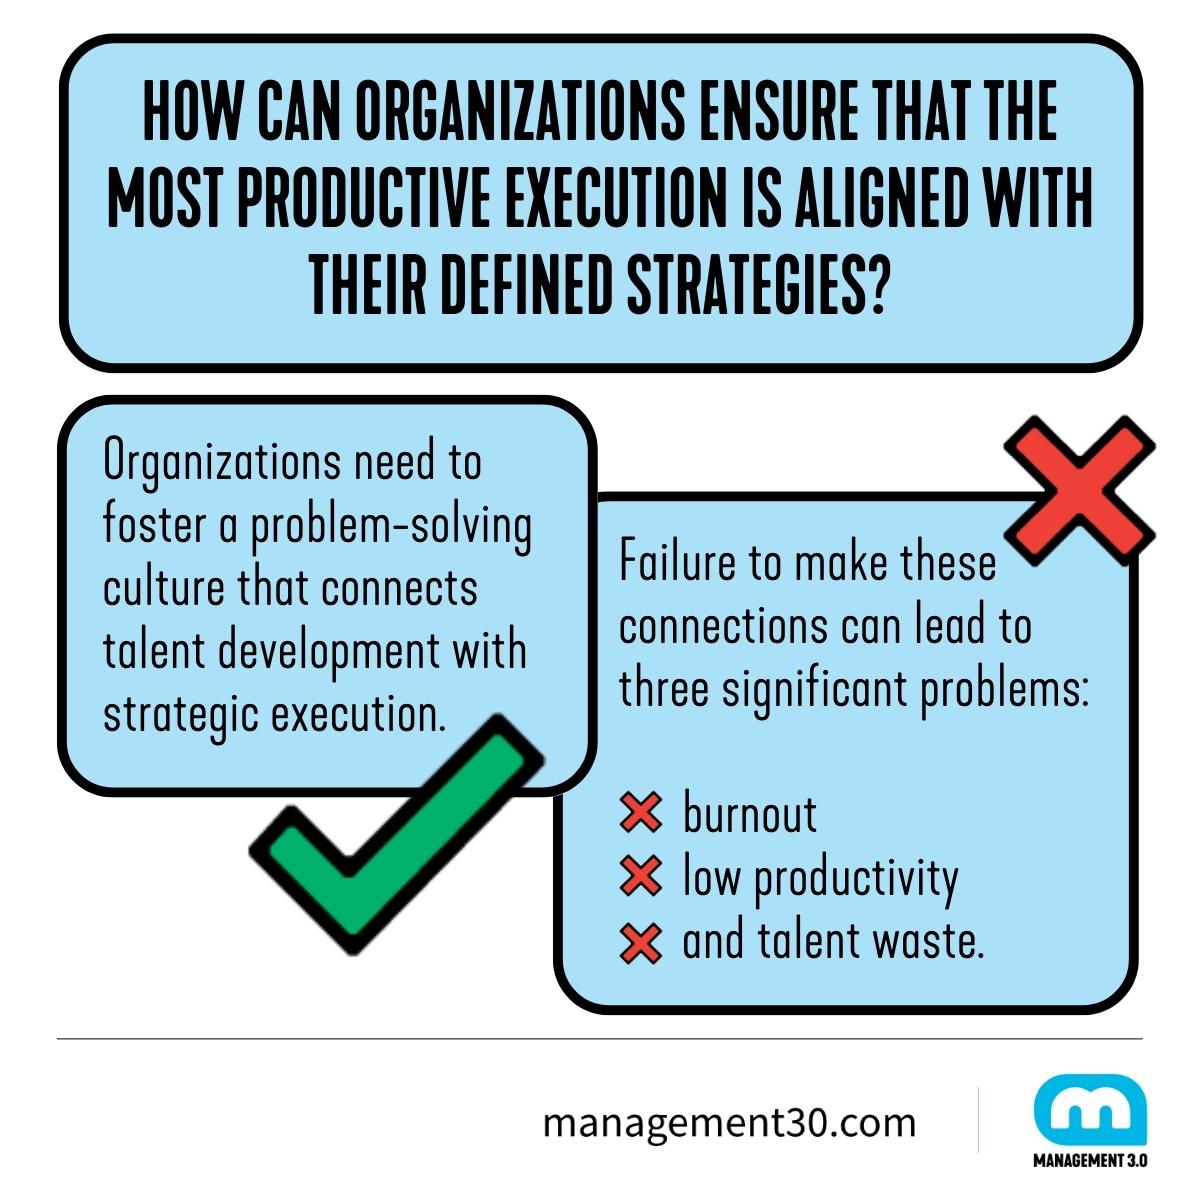 How can organizations ensure that the most productive execution is aligned with their defined strategies?